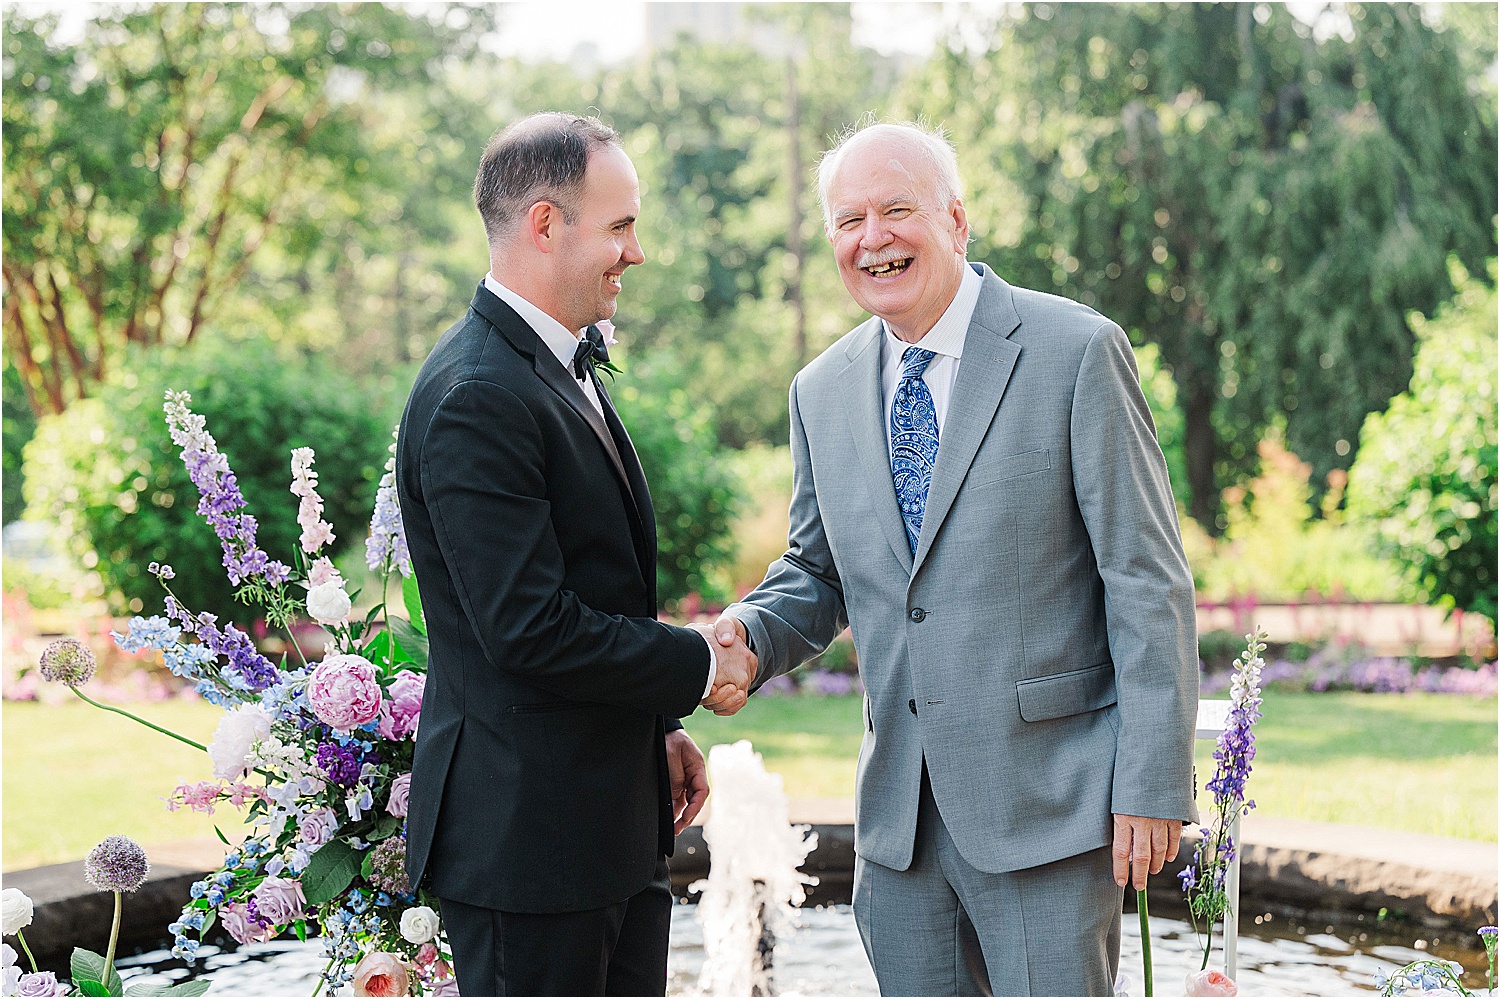 Groom with dad • Wild Weather - Love at a Phipps Conservatory Outdoor Garden Wedding